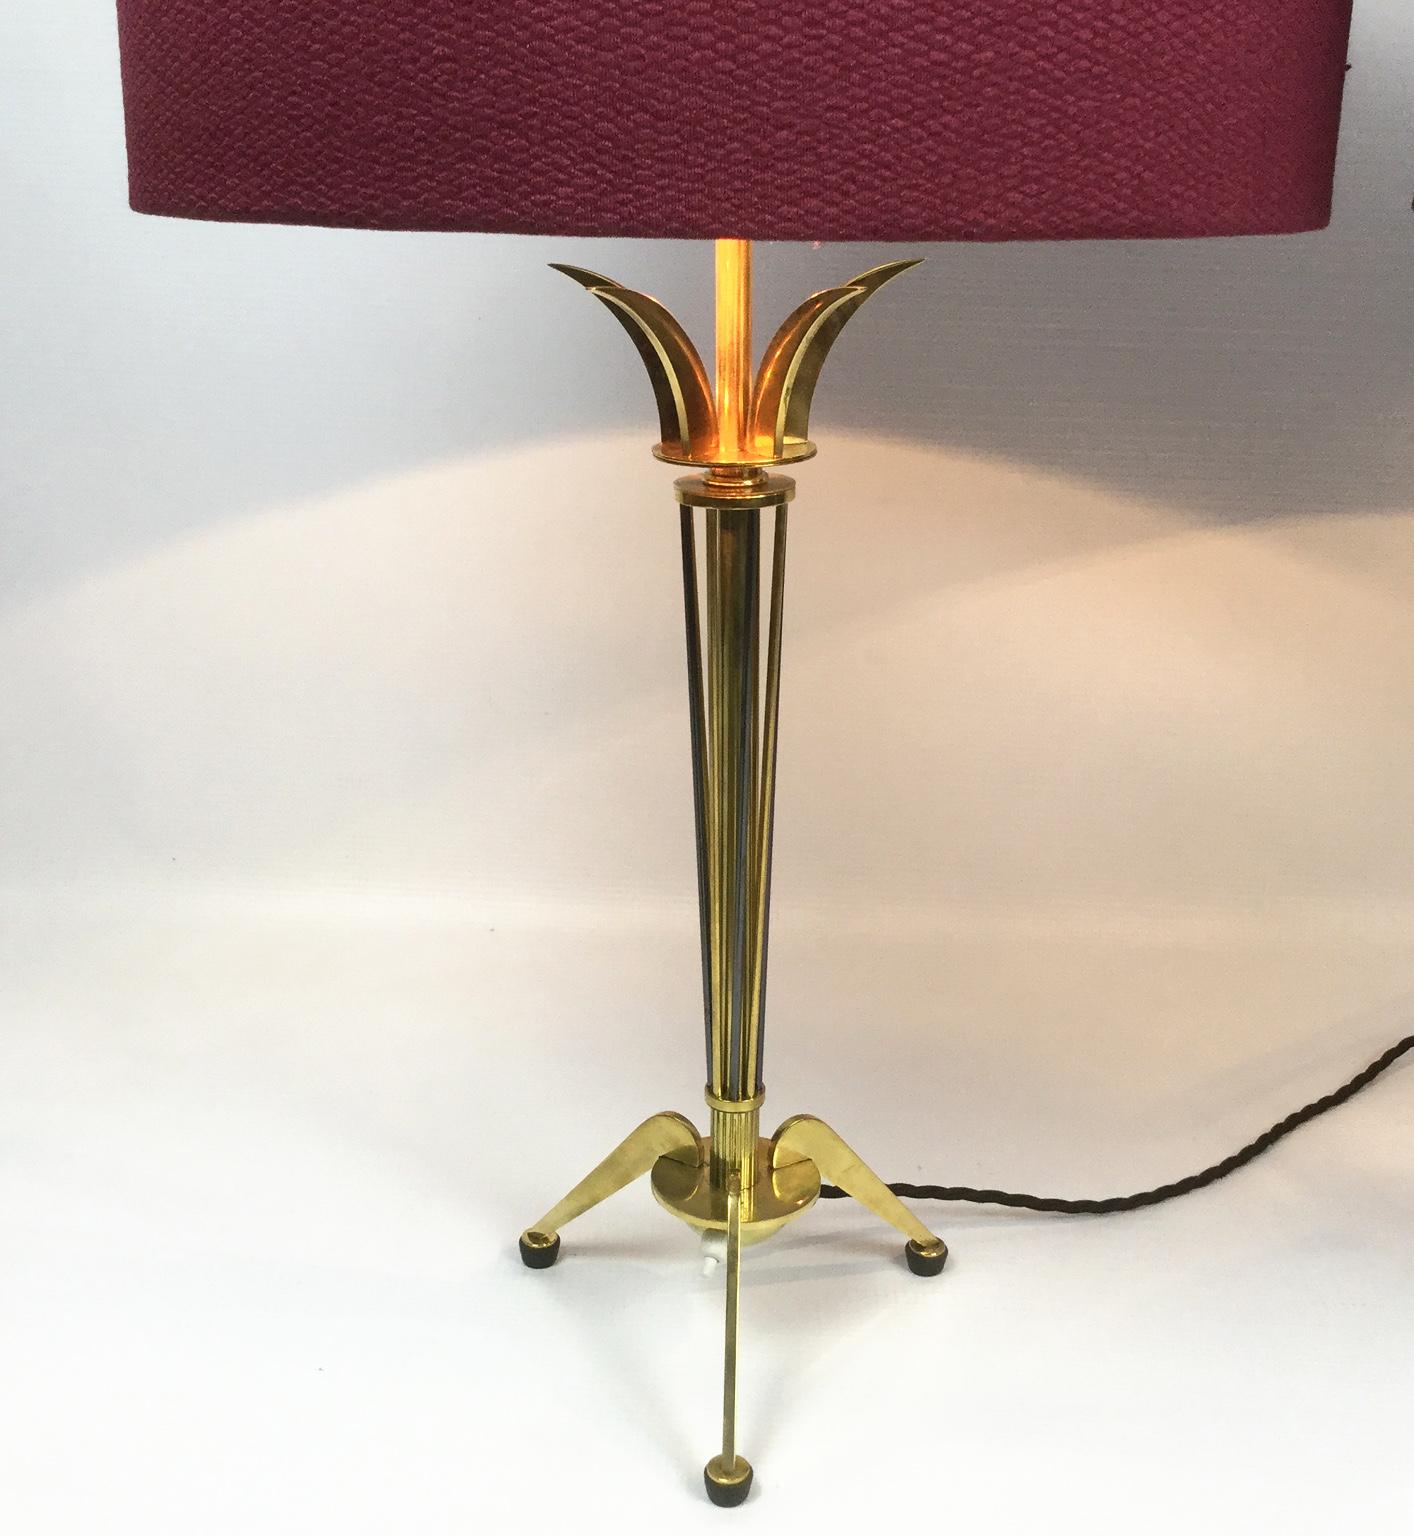 Metalwork Pair of Brass Table Lamps by Maison Arlus for Maison Jansen, France, 1950s For Sale